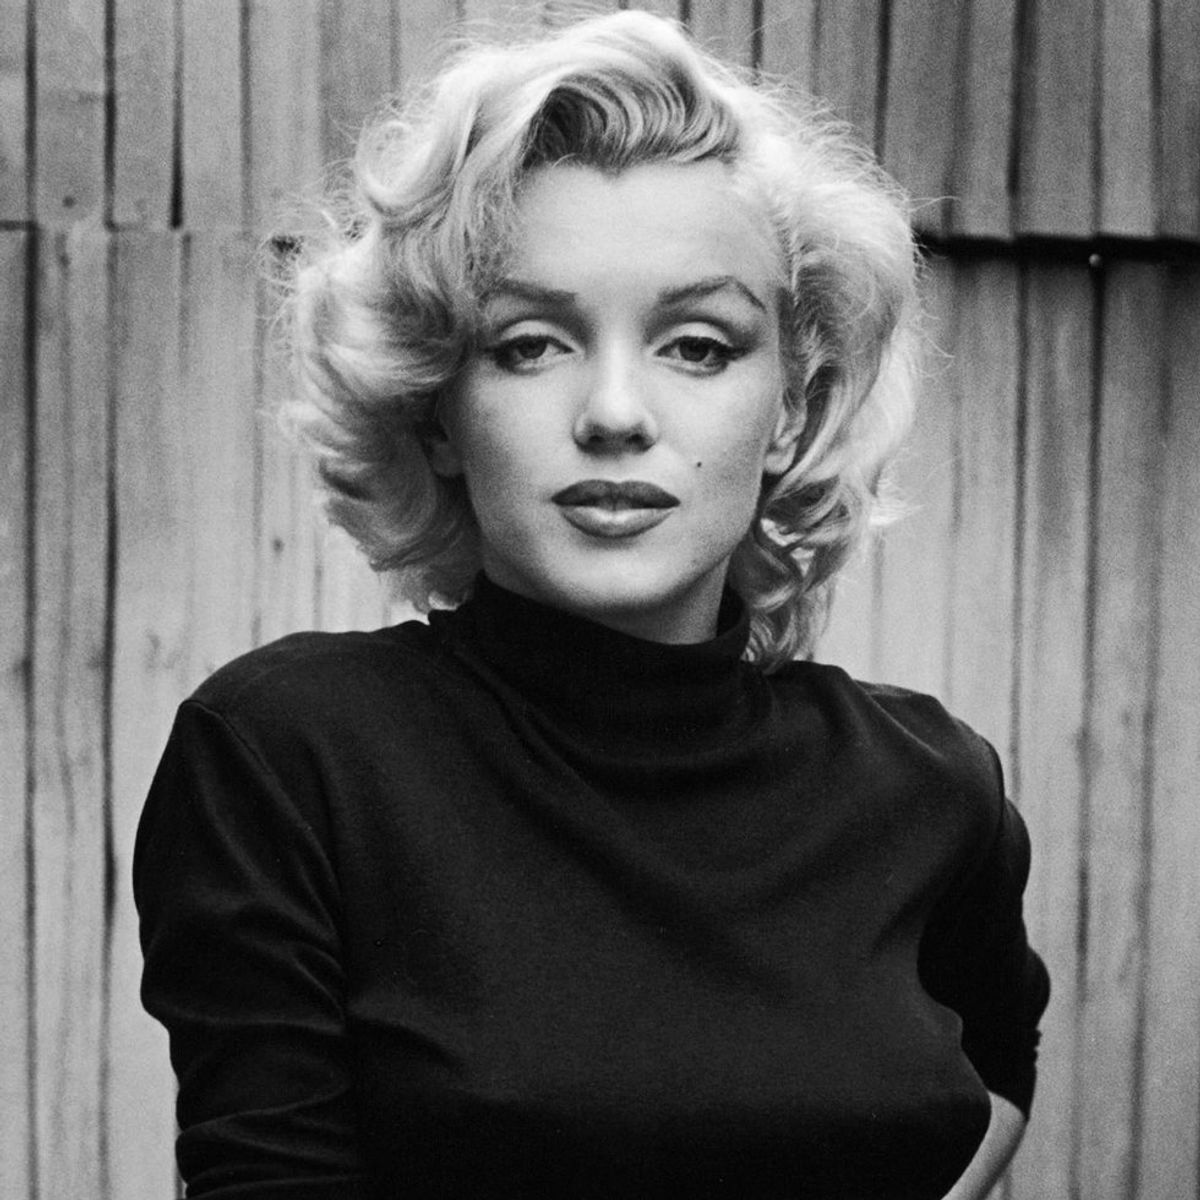 Marilyn Monroe: What An Inspiration (And The Definition "Hollywood")